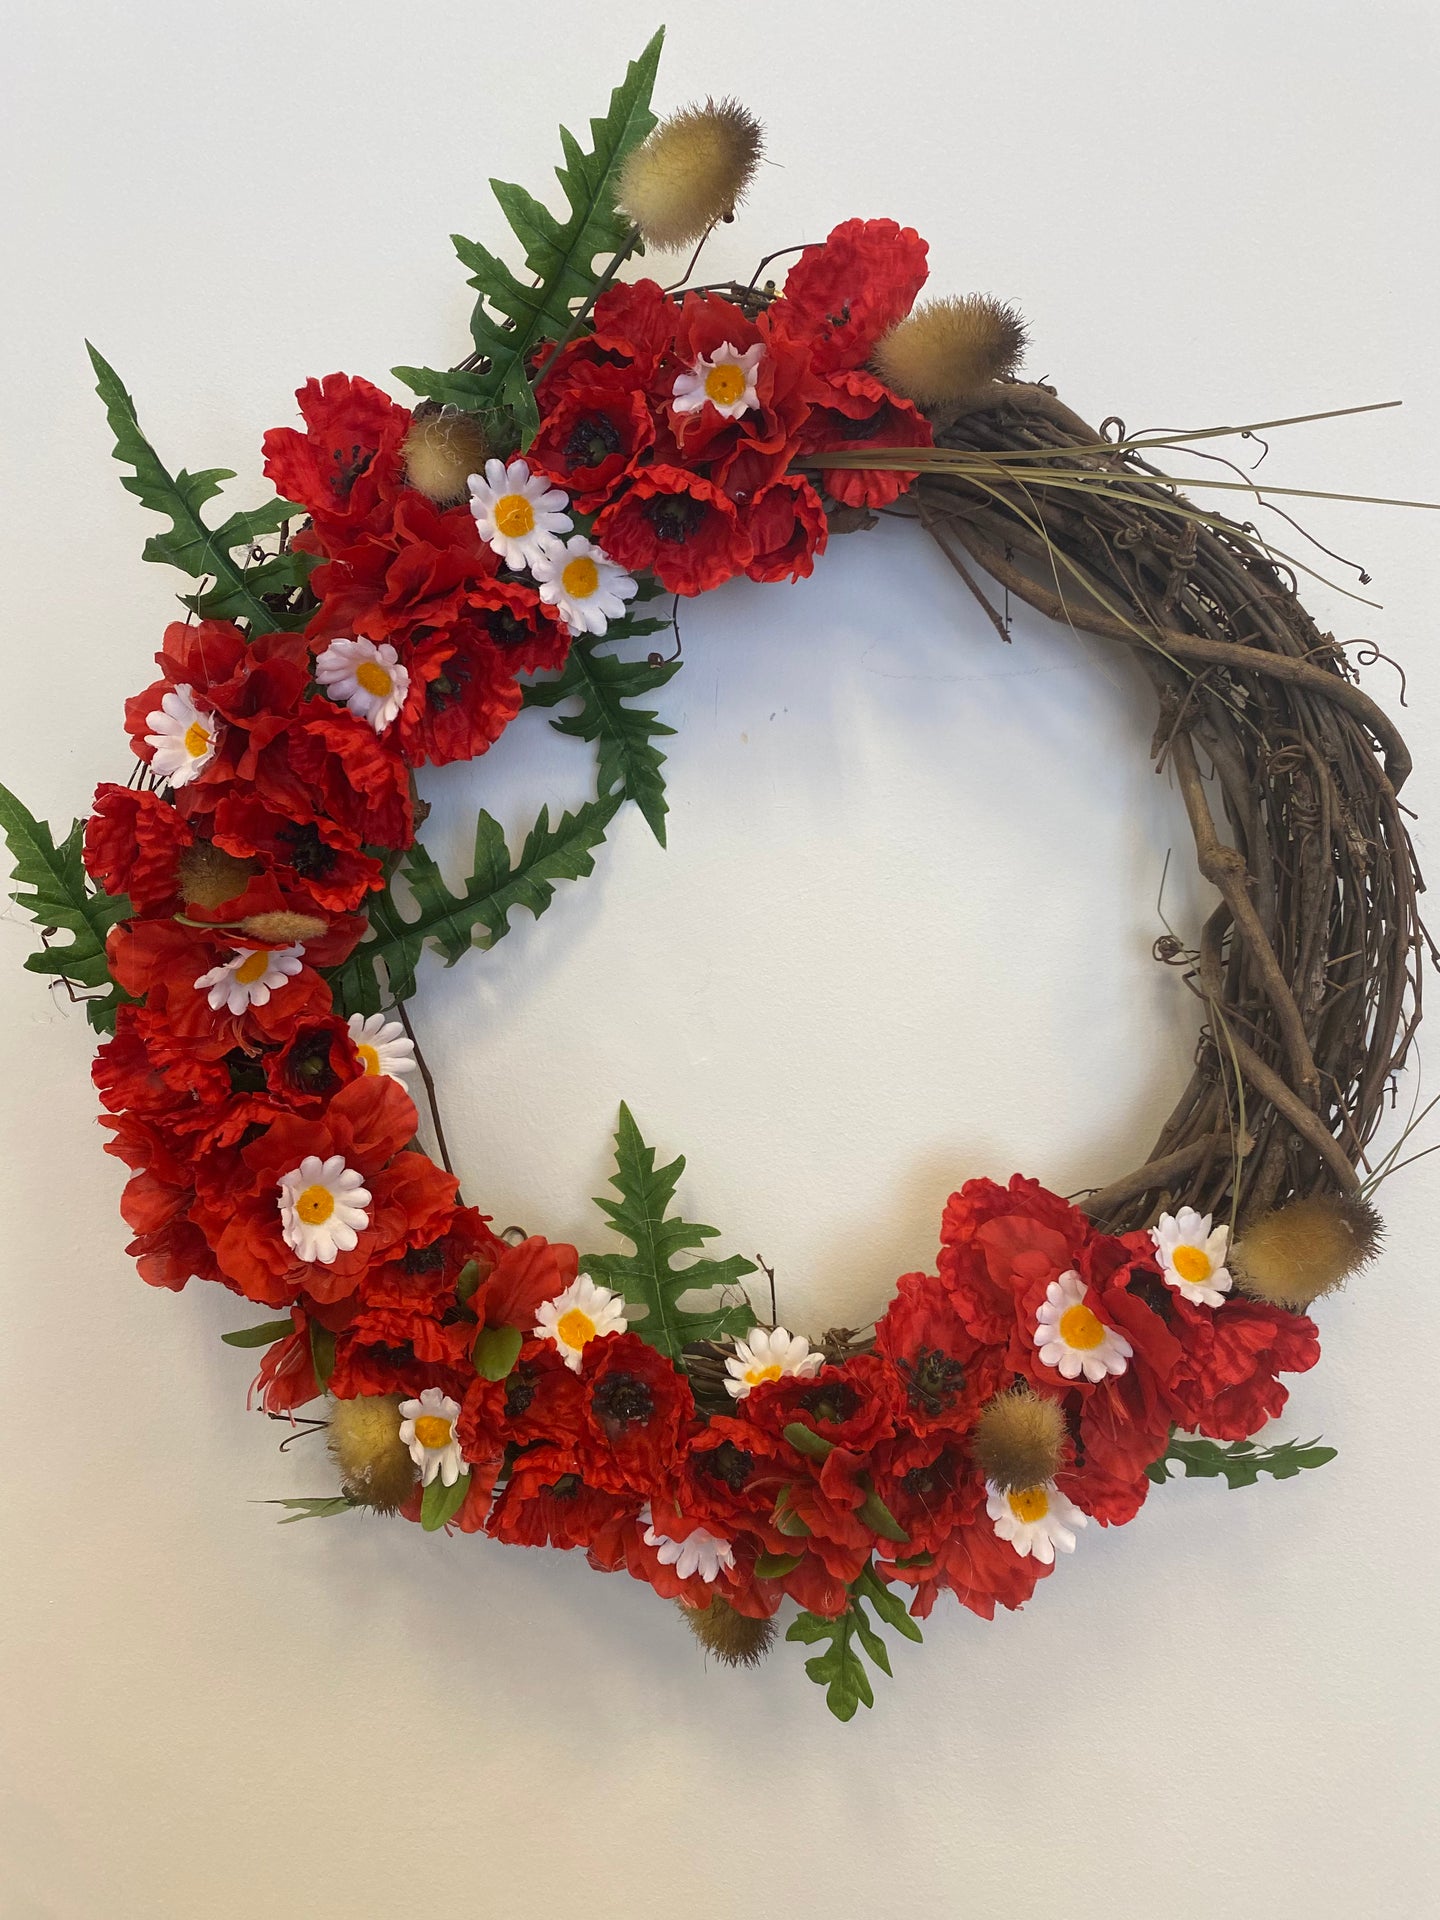 Large red and white floral wreath  17”diameter